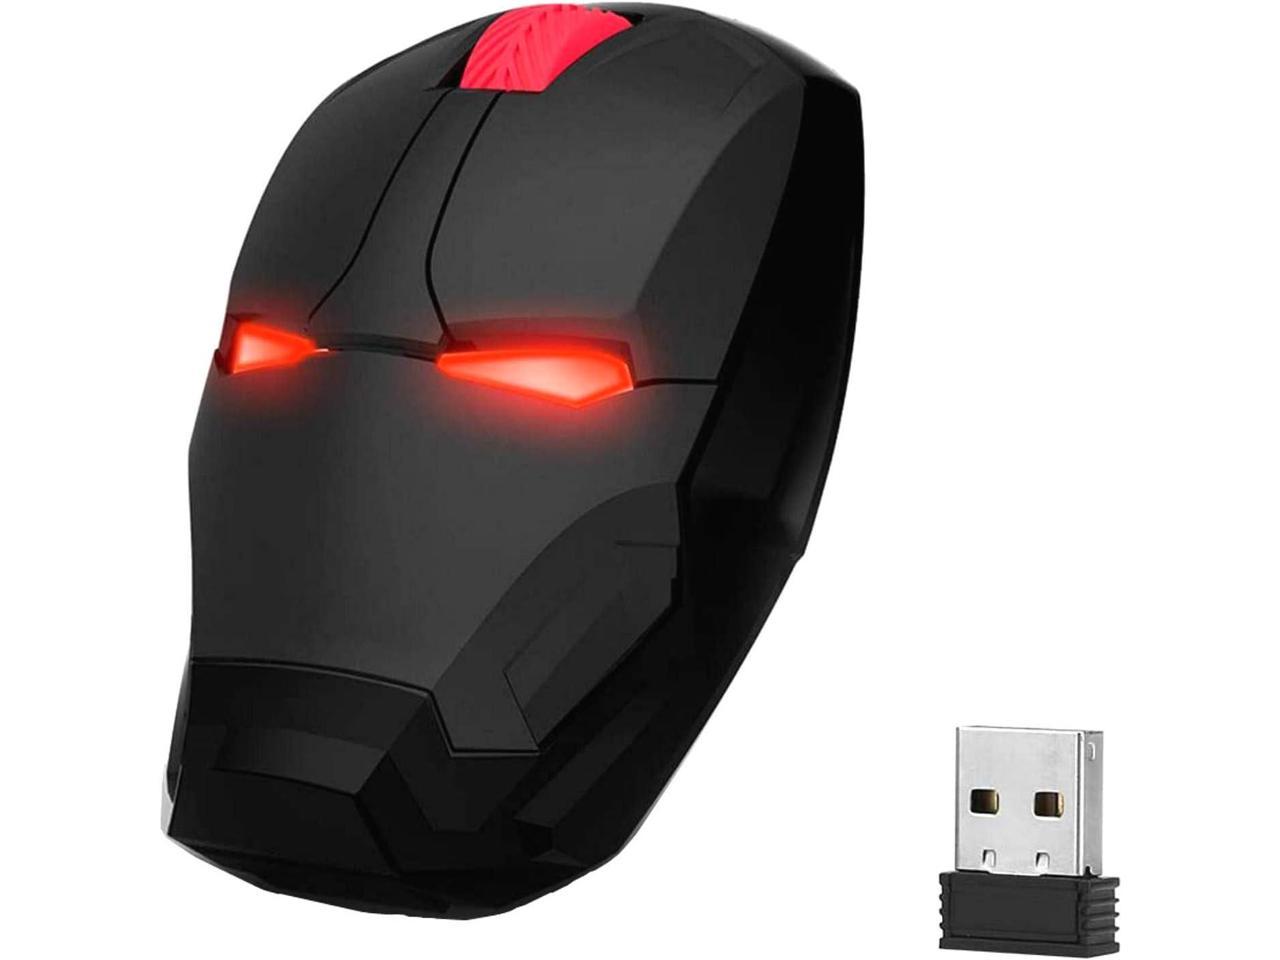 Cool Wireless Mouse USB Game Mice Ergonomic 2.4 G Portable Mobile Computer Click Silent Optical Mice with USB Receiver Multi-Color Choosing for Notebook PC Laptop Computer Mac Book 